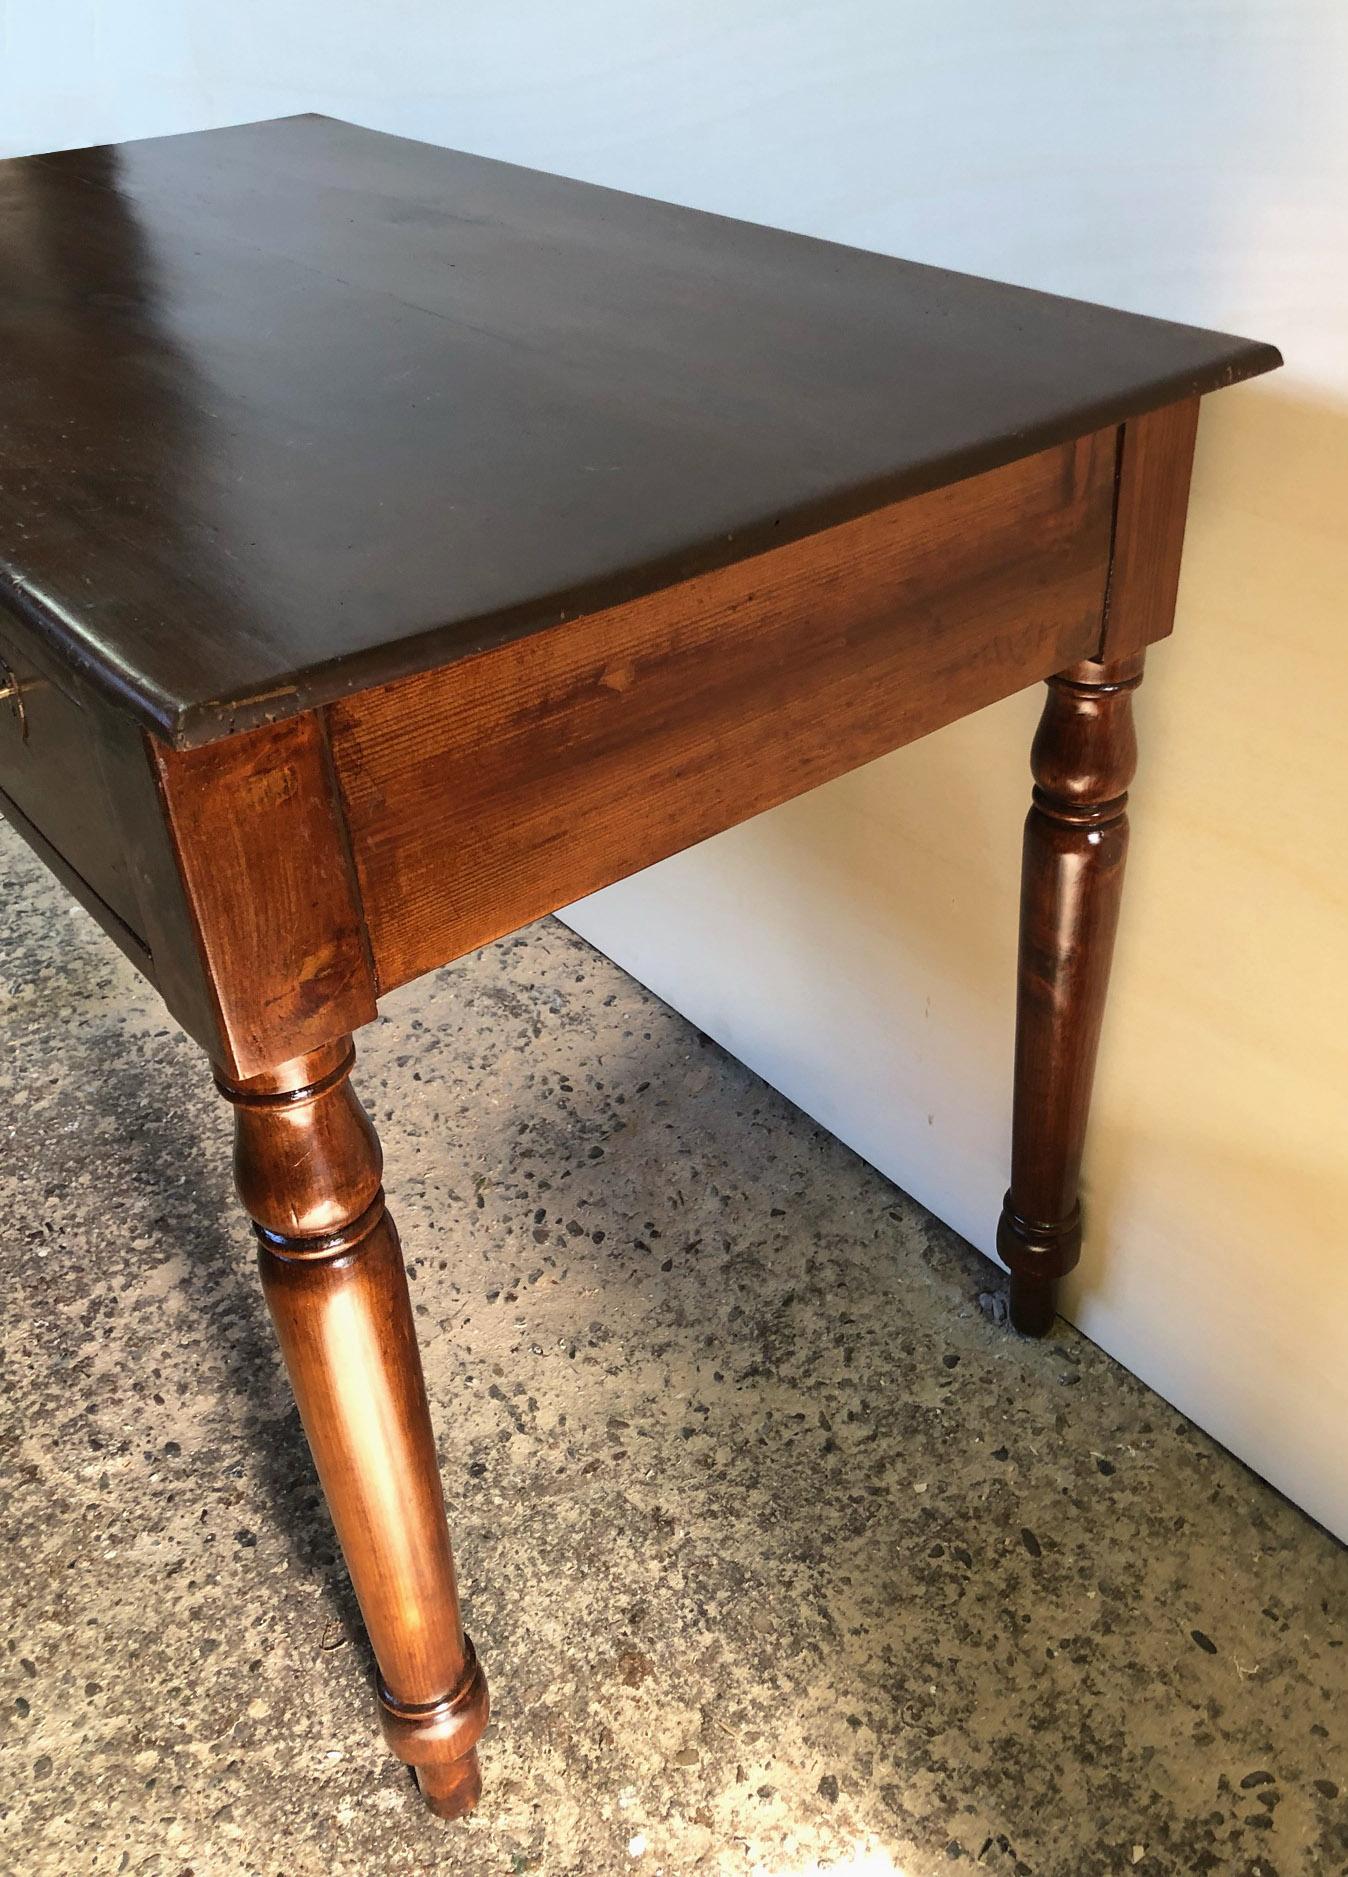 Original Italian Desk in Walnut and Fir, with Three Drawers, Turned Leg In Good Condition For Sale In Buggiano, IT